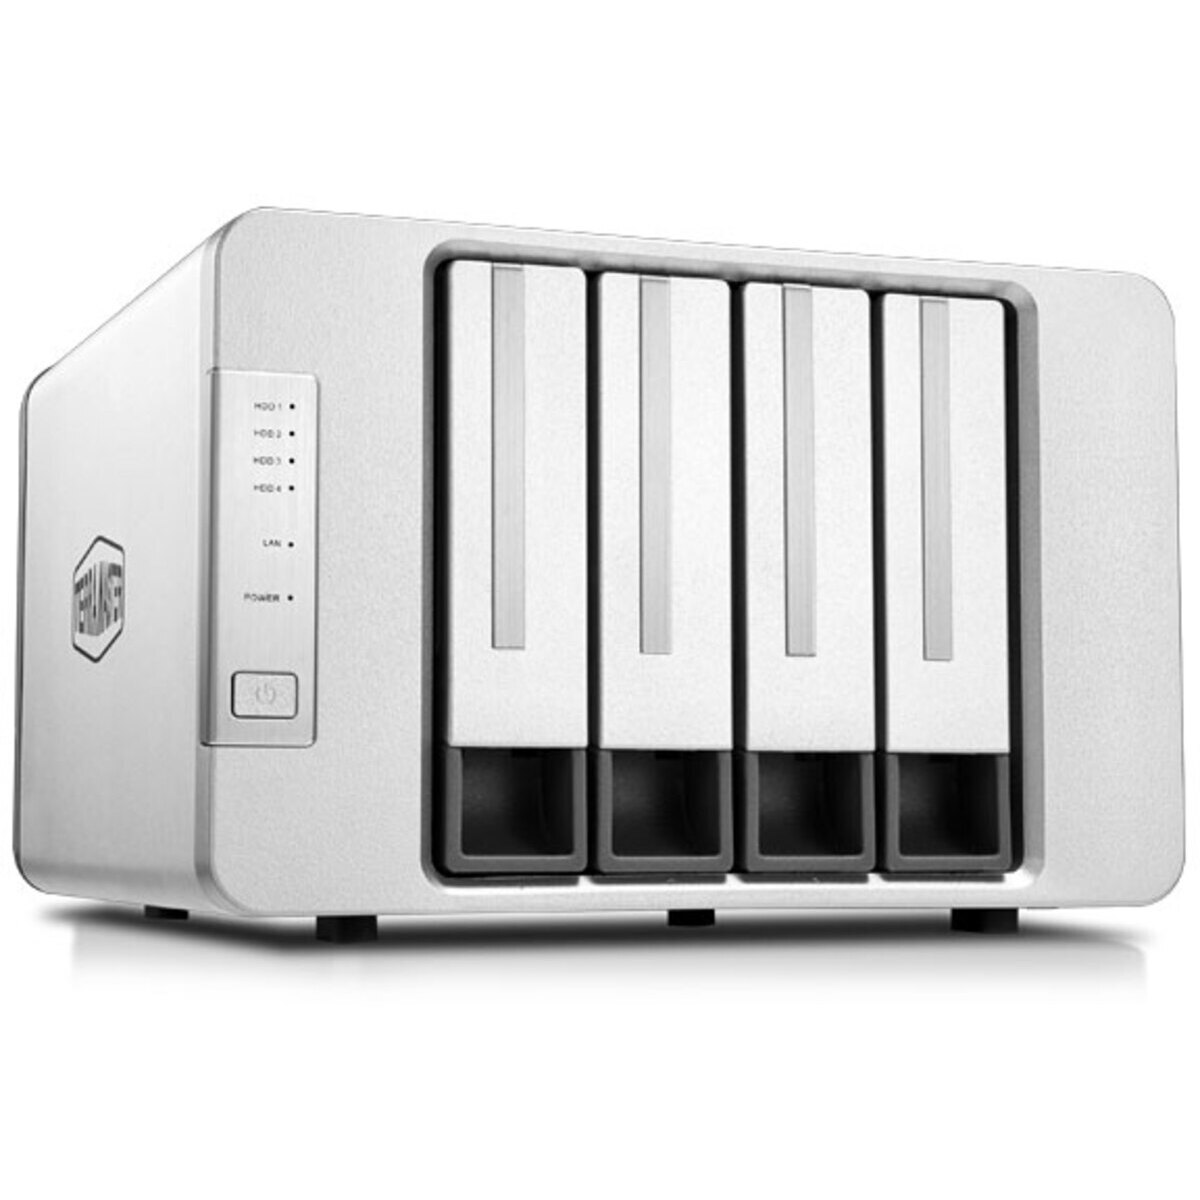 TerraMaster F4-223 20tb 4-Bay Desktop Personal / Basic Home / Small Office NAS - Network Attached Storage Device 2x10tb Seagate EXOS X18 ST10000NM018G 3.5 7200rpm SATA 6Gb/s HDD ENTERPRISE Class Drives Installed - Burn-In Tested - FREE RAM UPGRADE F4-223